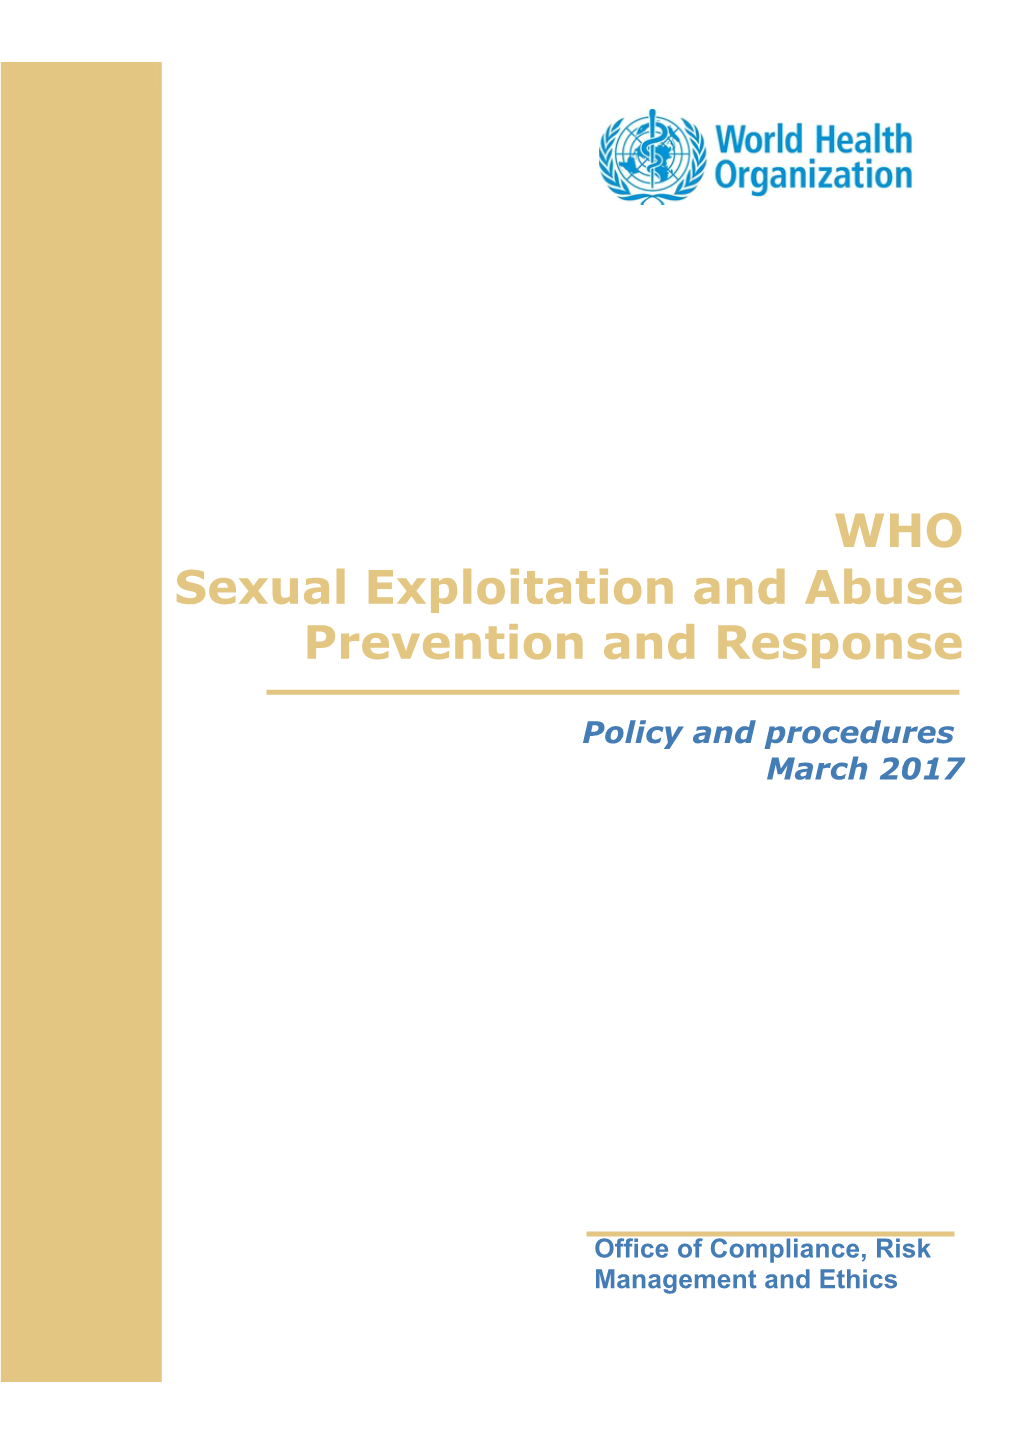 Sexual Exploitation and Abuse Prevention and Response Policy and Holding Them to UN and WHO Standards